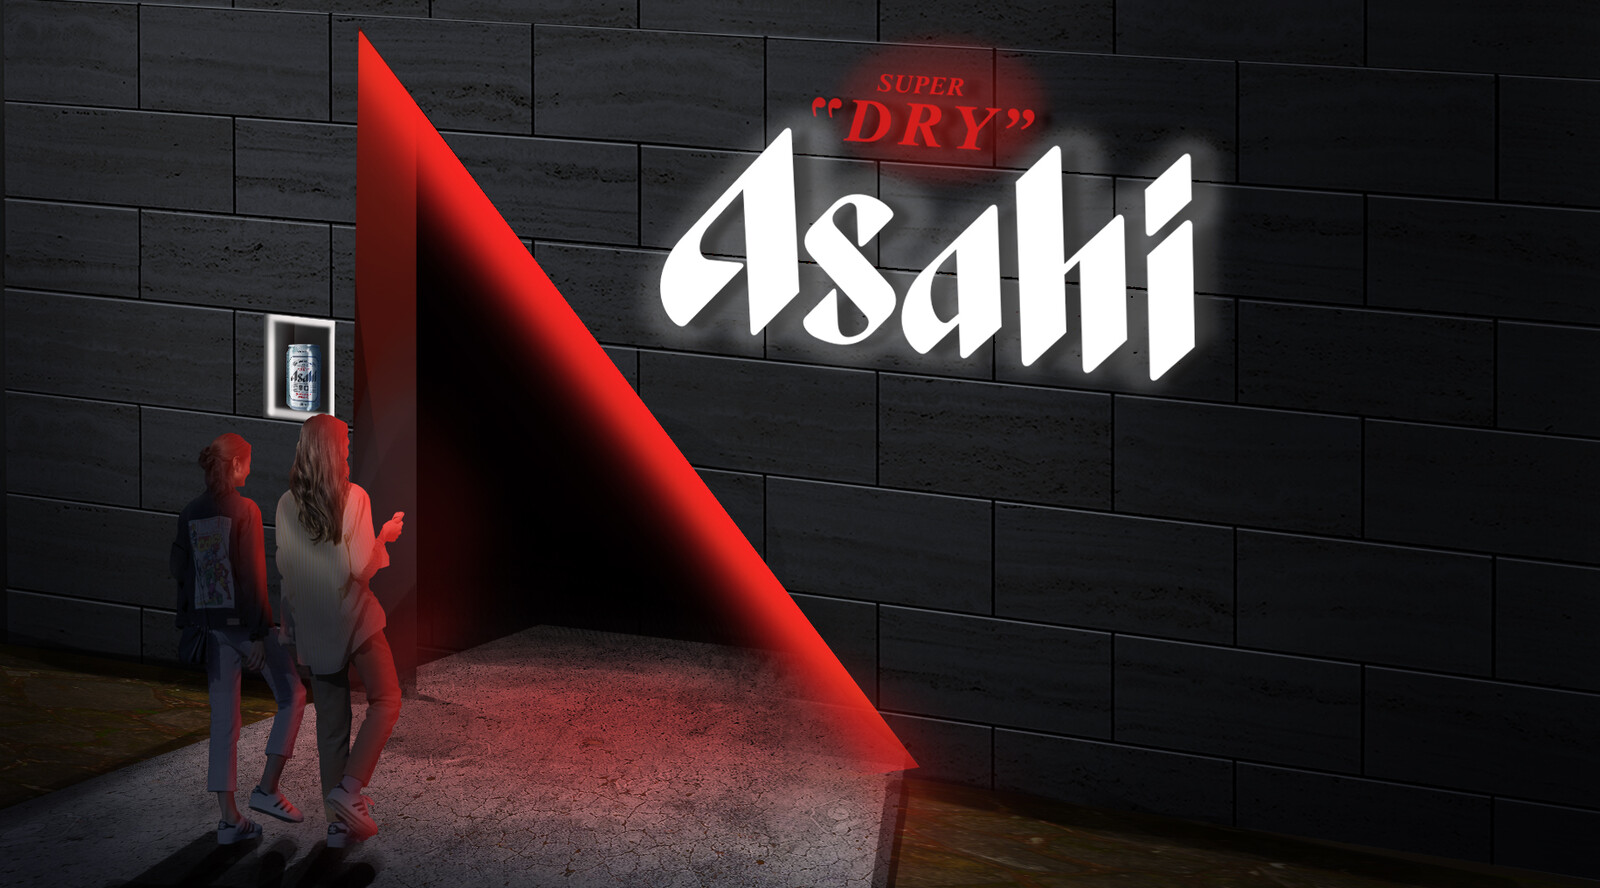 Panel put on bar or club entrance to indicate the night was sponsored by Asahi